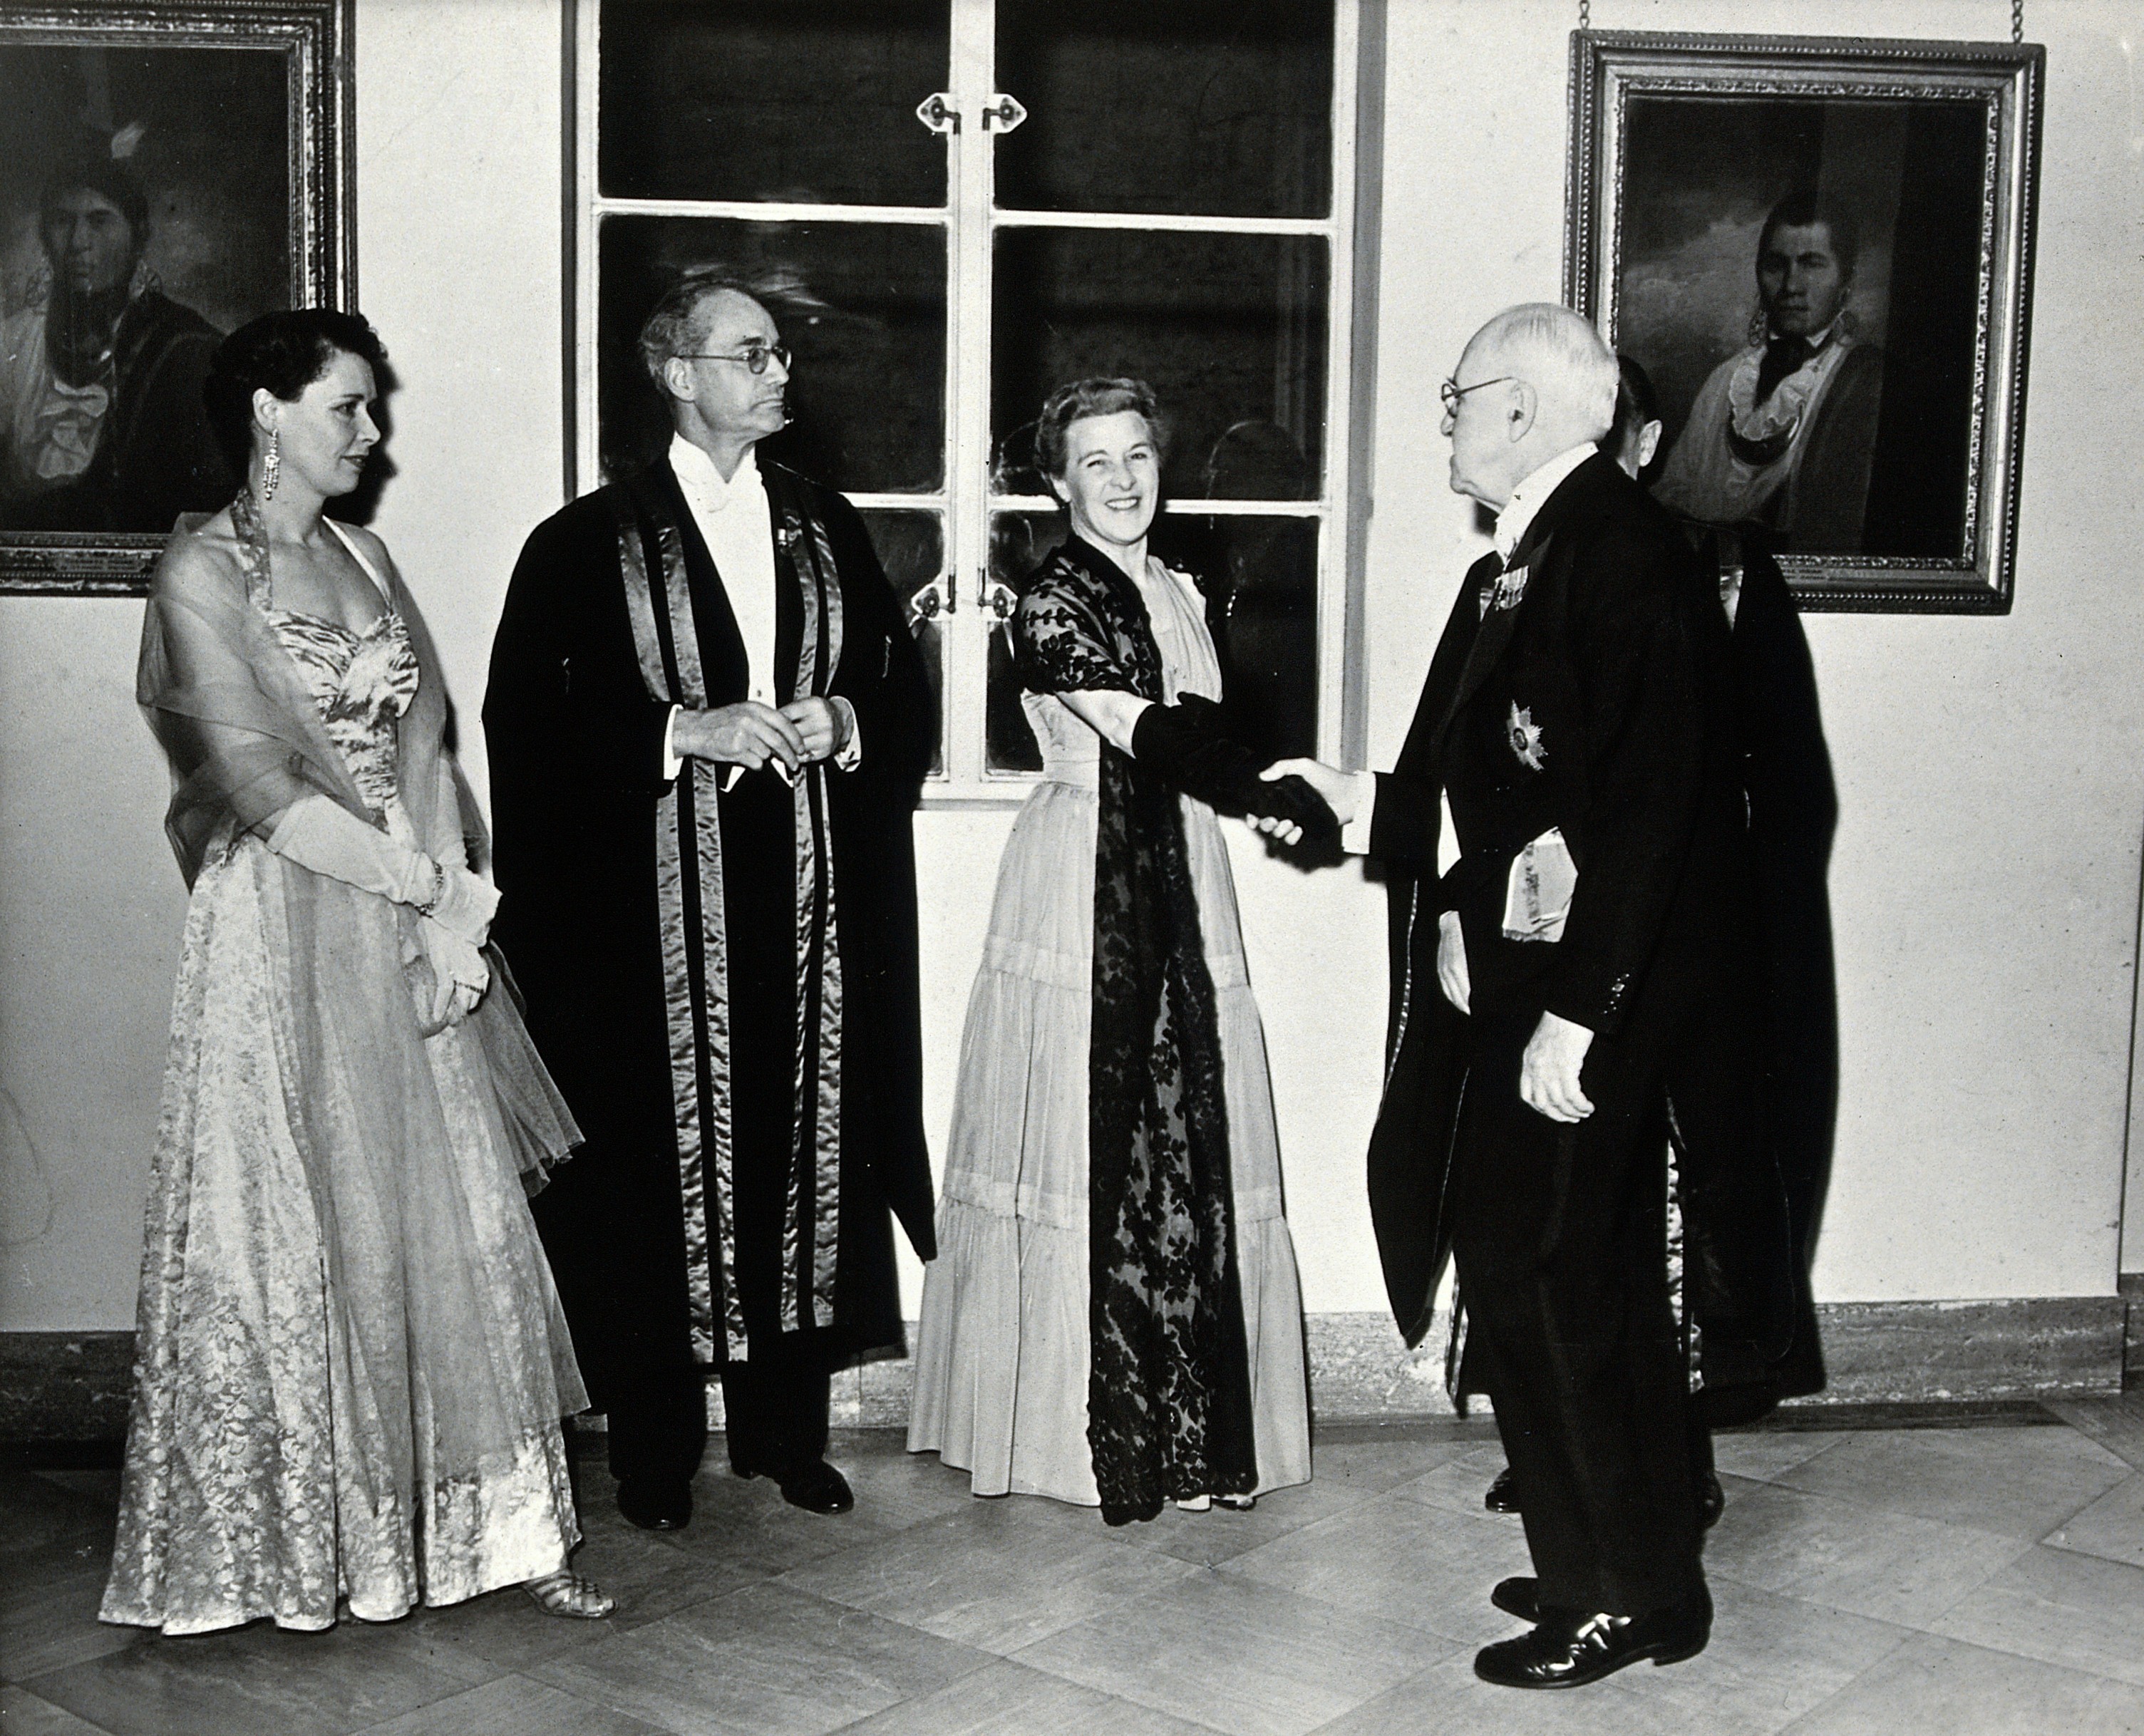 Sir Henry Hallett Dale at the dinner of the Faculty of Anaes Wellcome V0026255